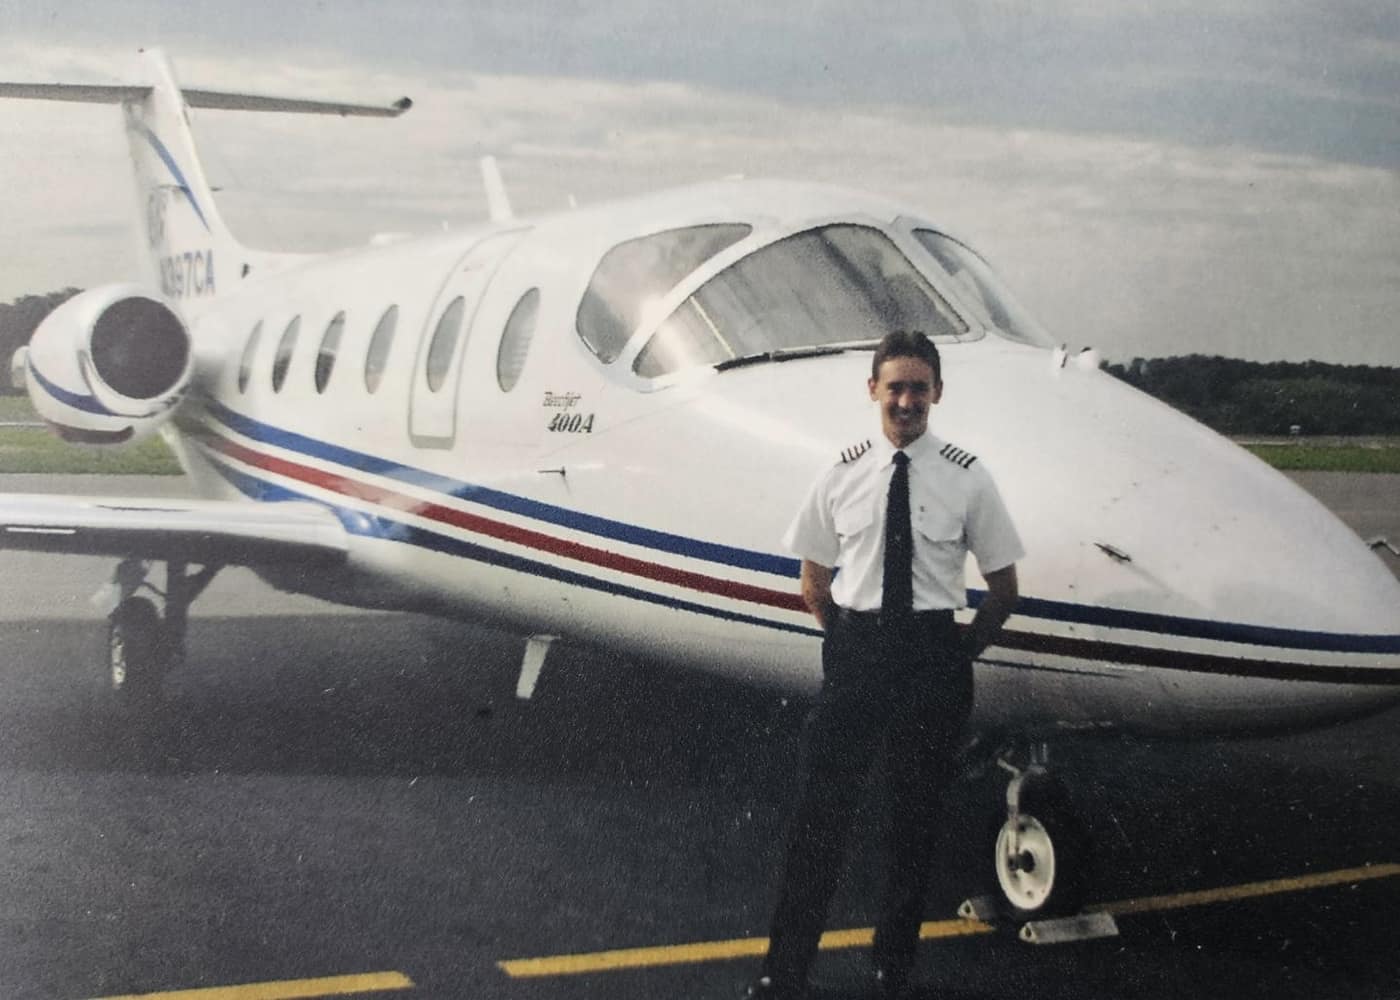 Chase Trissel, shown here in front of a business jet early in his flying career, has amassed more than 9,000 flight hours. (Photo: Chase Trissel)